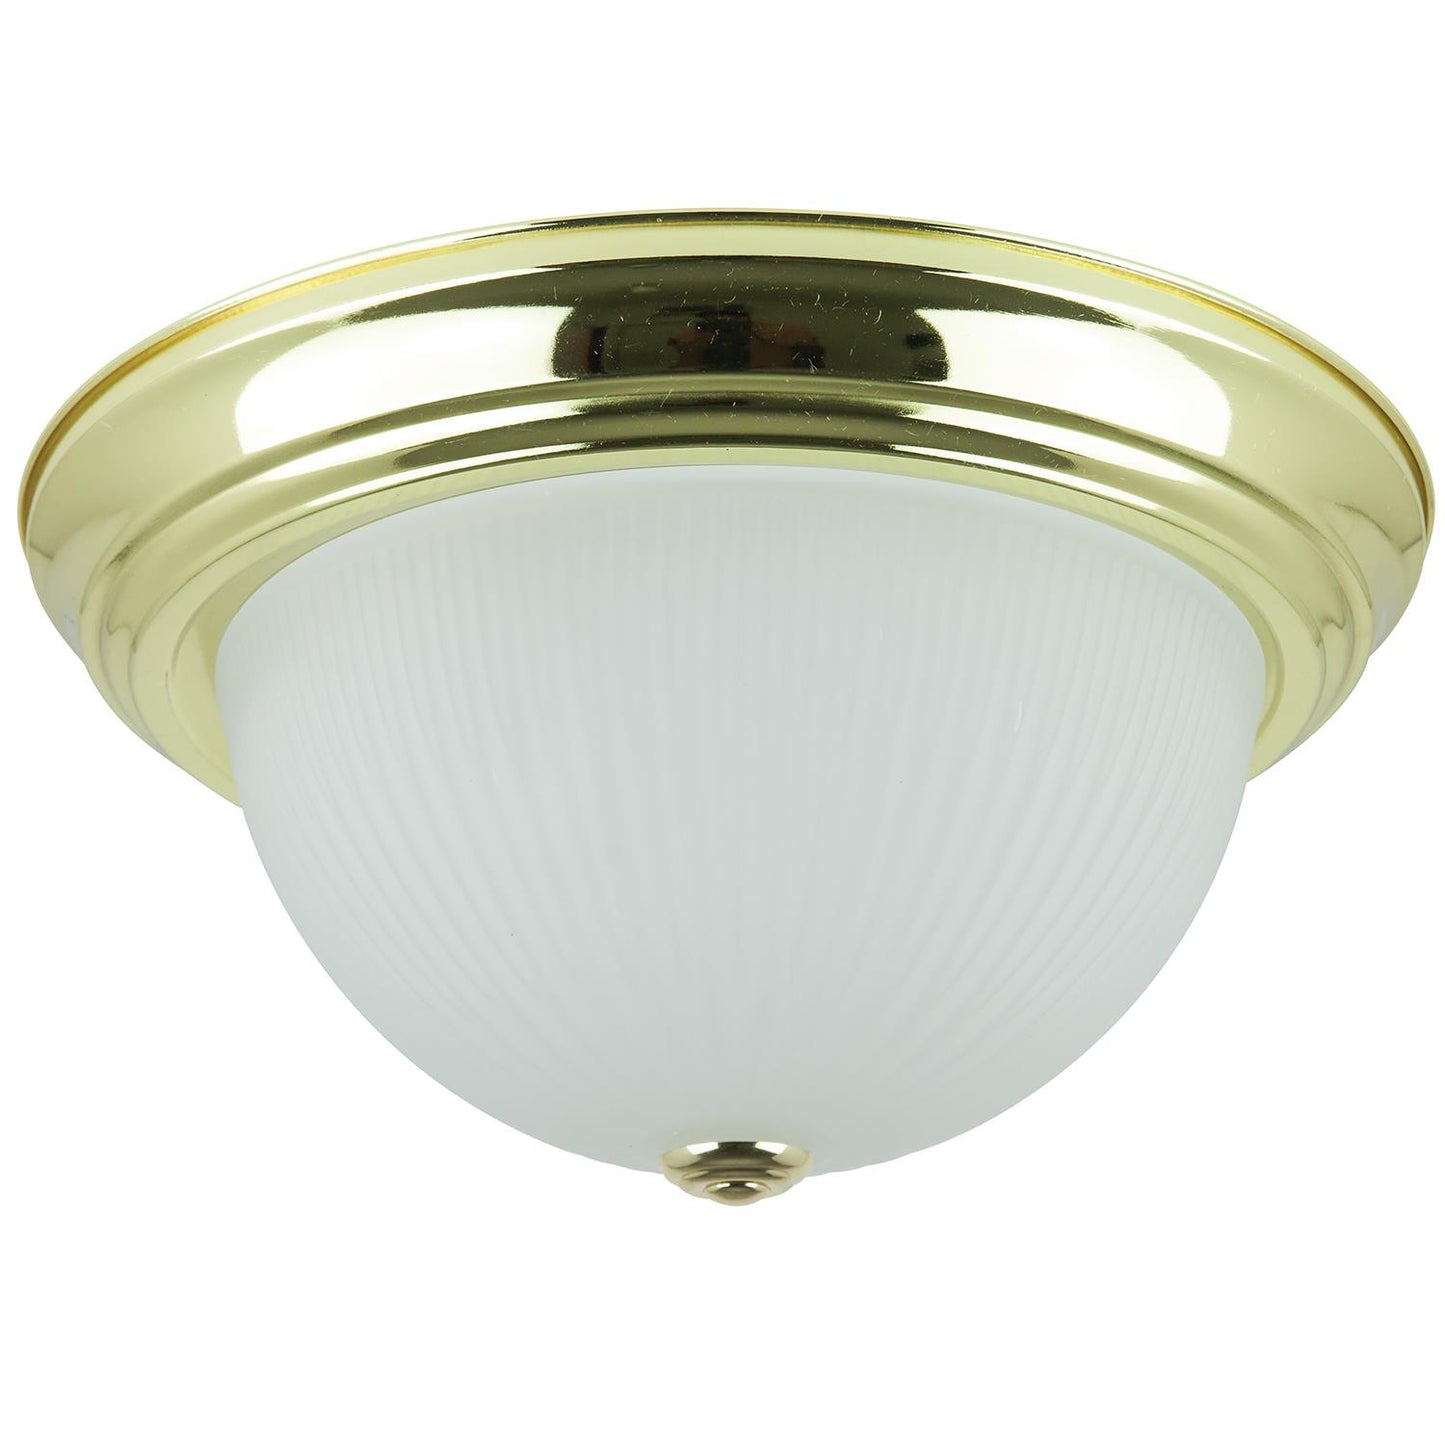 Sunlite 13" Energy Saving Dome Fixture, Polished Brass Finish, Frosted Glass